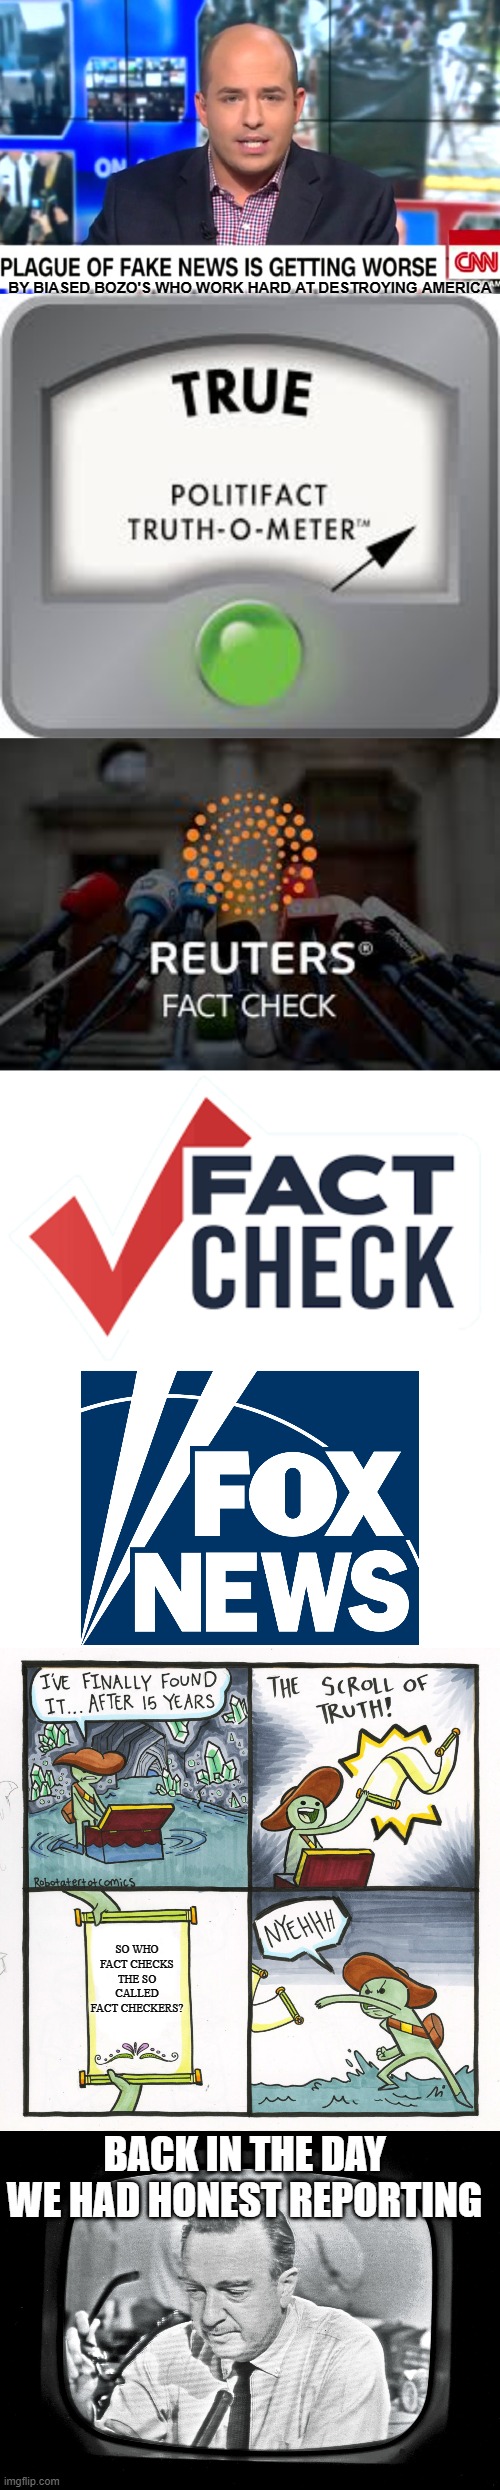 THE TRUTH IS MUDDLED IN BULLSHIT. | BY BIASED BOZO'S WHO WORK HARD AT DESTROYING AMERICA; SO WHO FACT CHECKS THE SO CALLED FACT CHECKERS? BACK IN THE DAY WE HAD HONEST REPORTING | image tagged in brian stelter douchebag fake news cnn,fox news,memes,the scroll of truth,fact checking | made w/ Imgflip meme maker